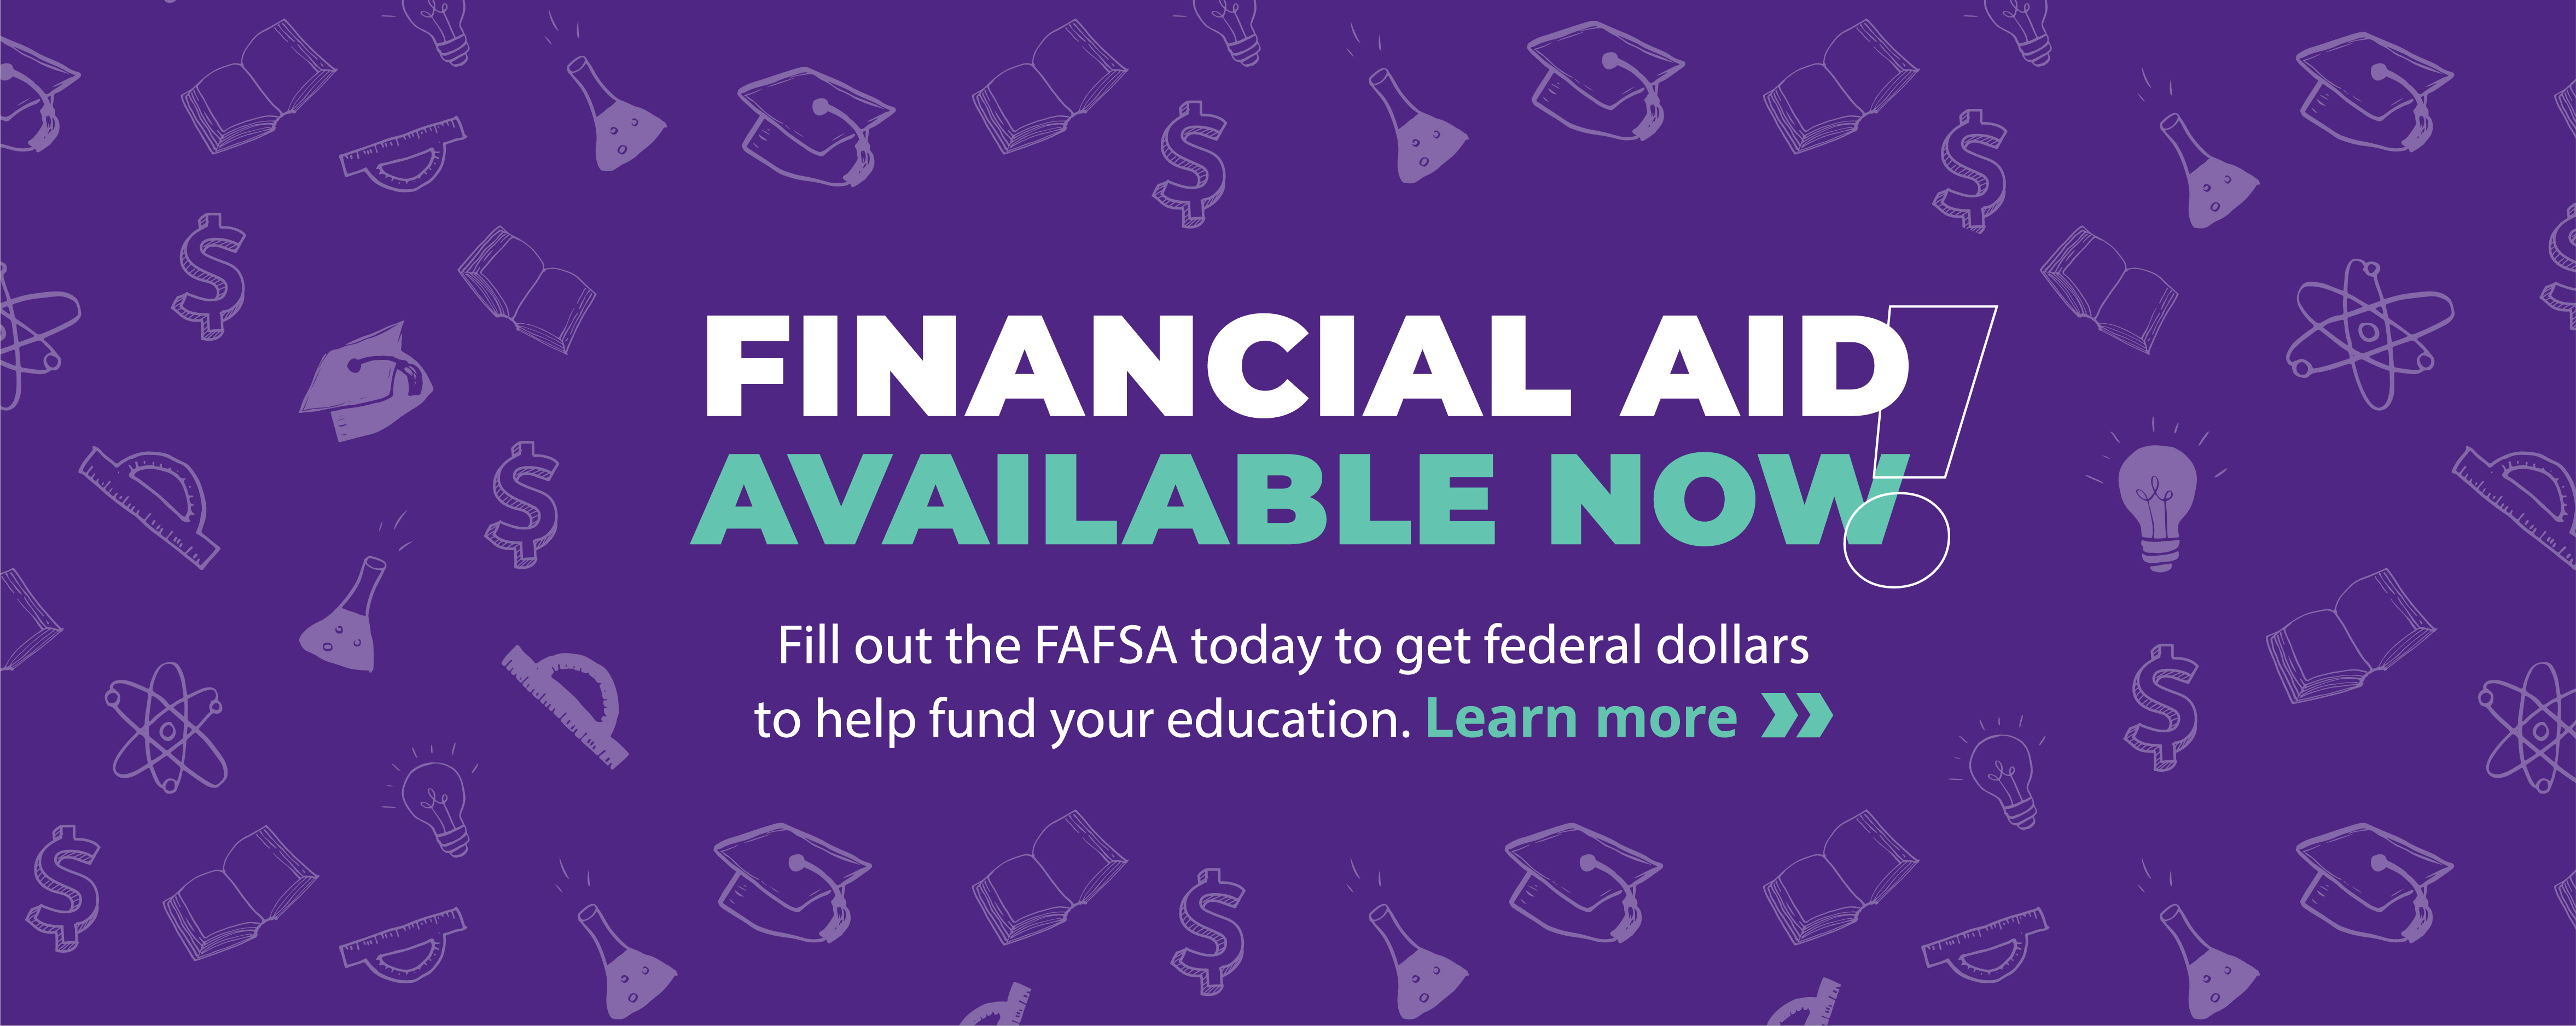 Financial aid available now on a purple background.